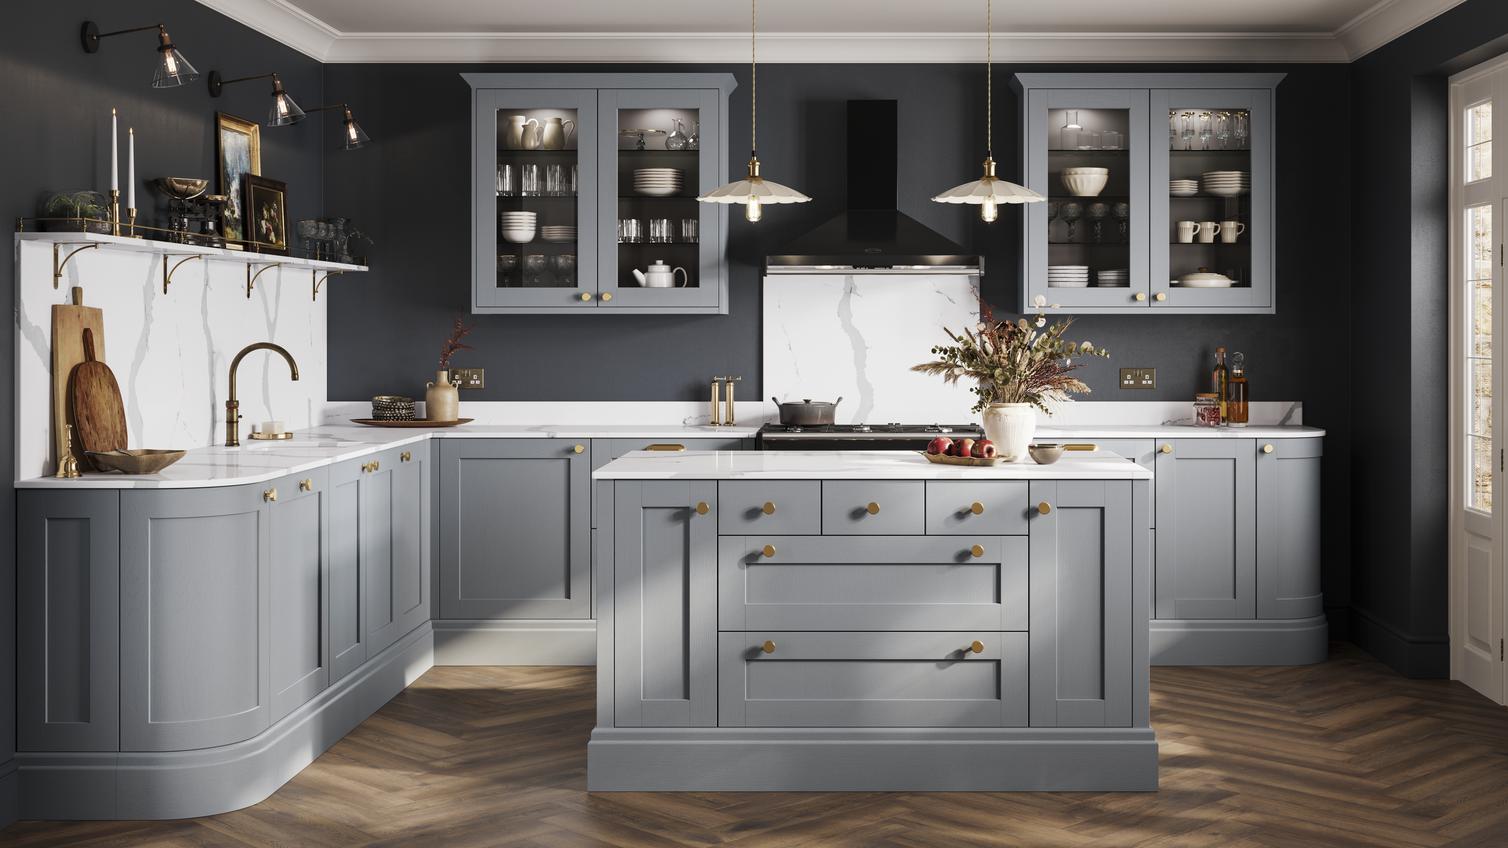 Dusk blue shaker kitchen from the Halesworth range. L-shape layout and kitchen island, with brass handles and white worktops